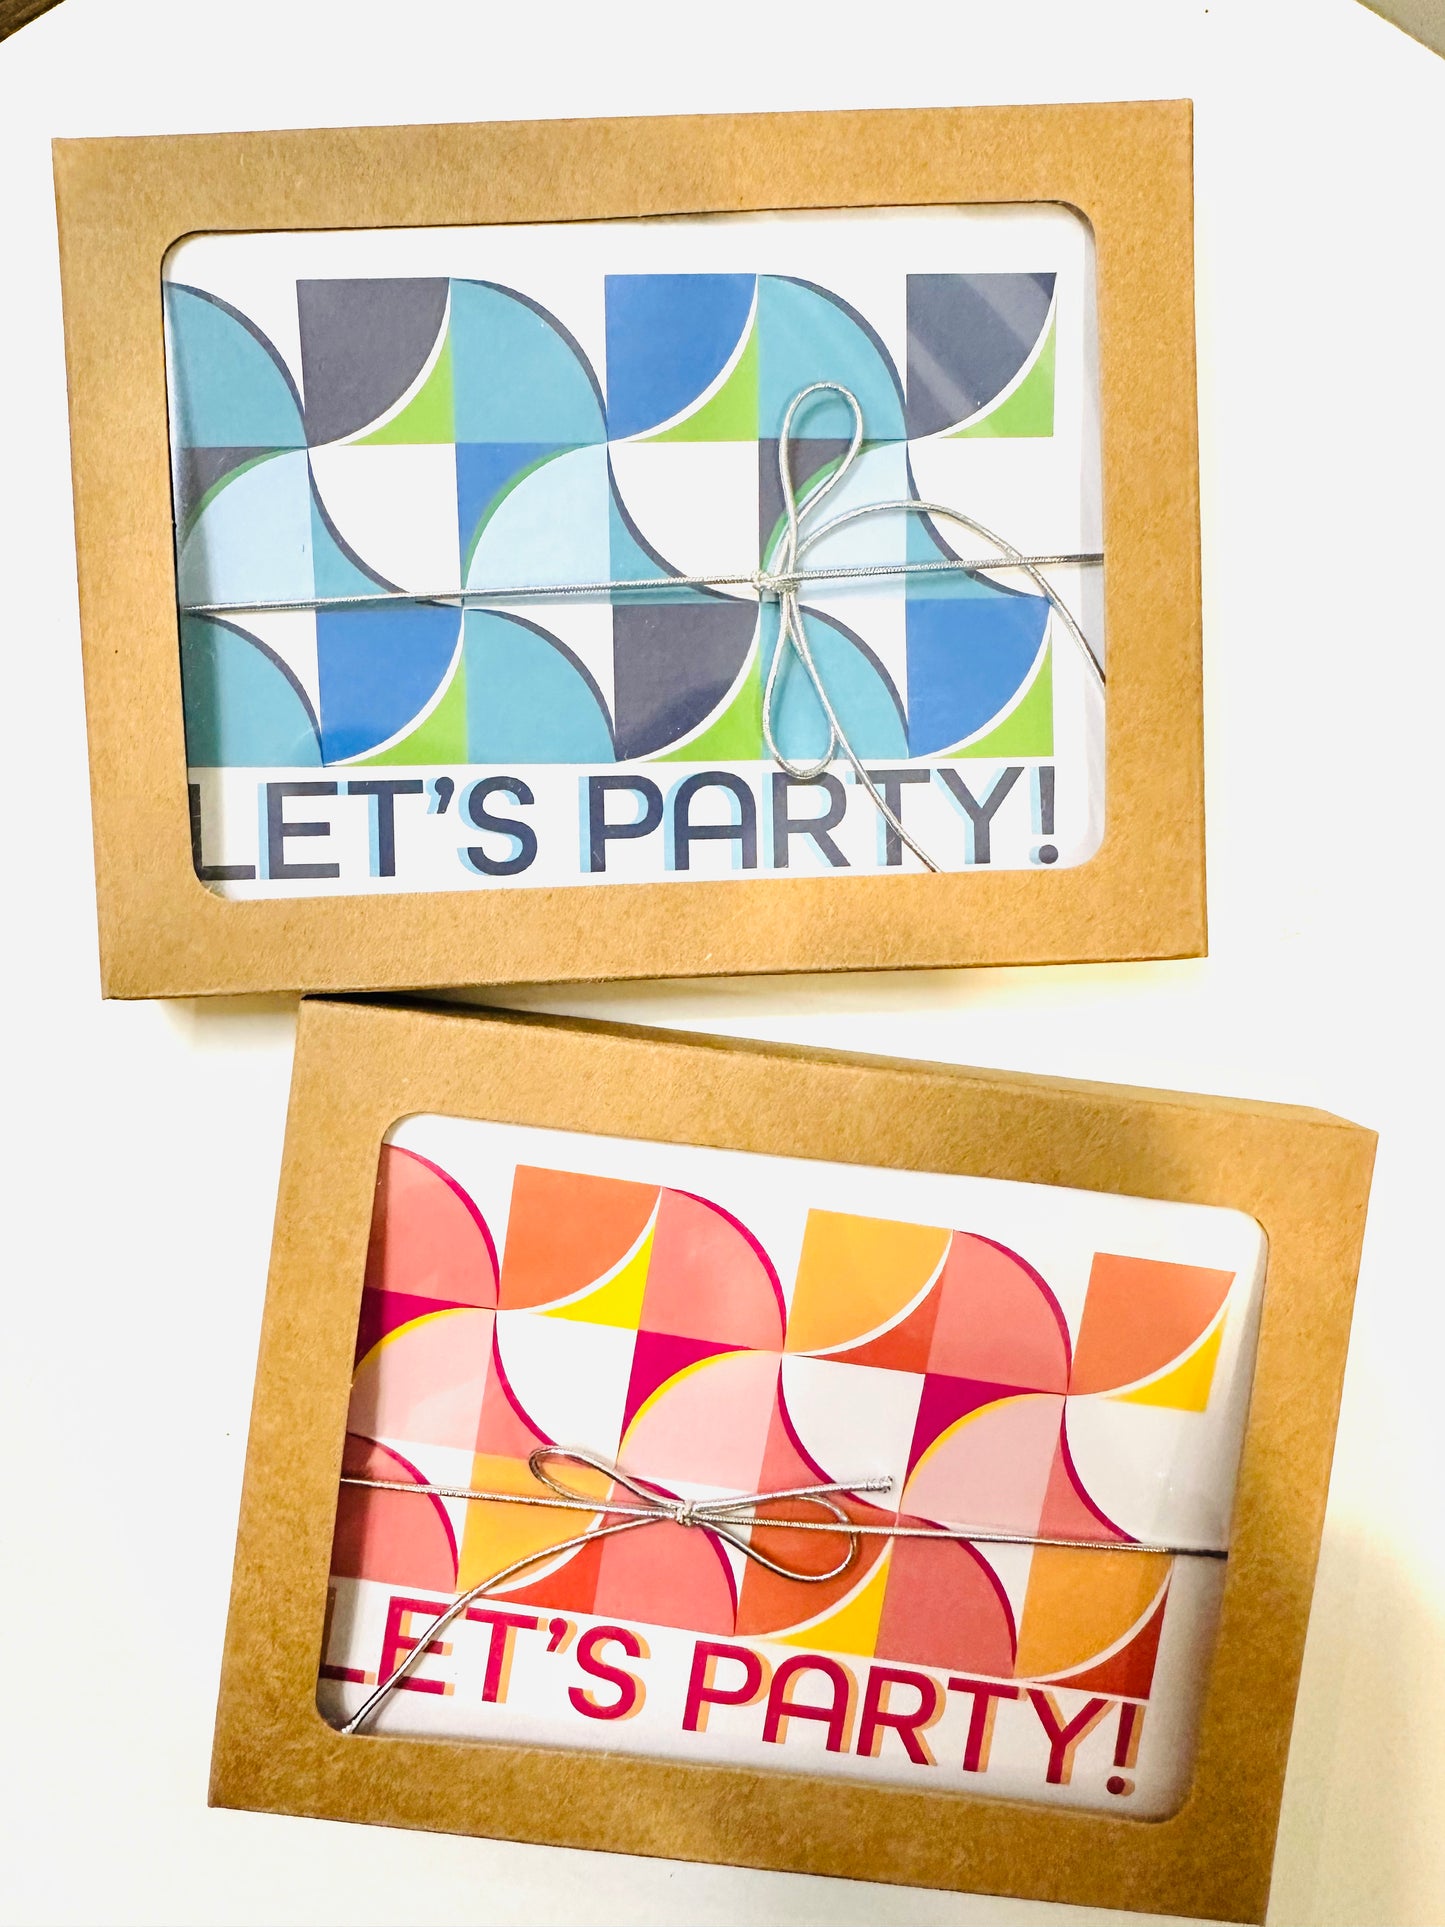 Pink LETS PARTY Geometric Invitations A2 Boxed note card set of 10